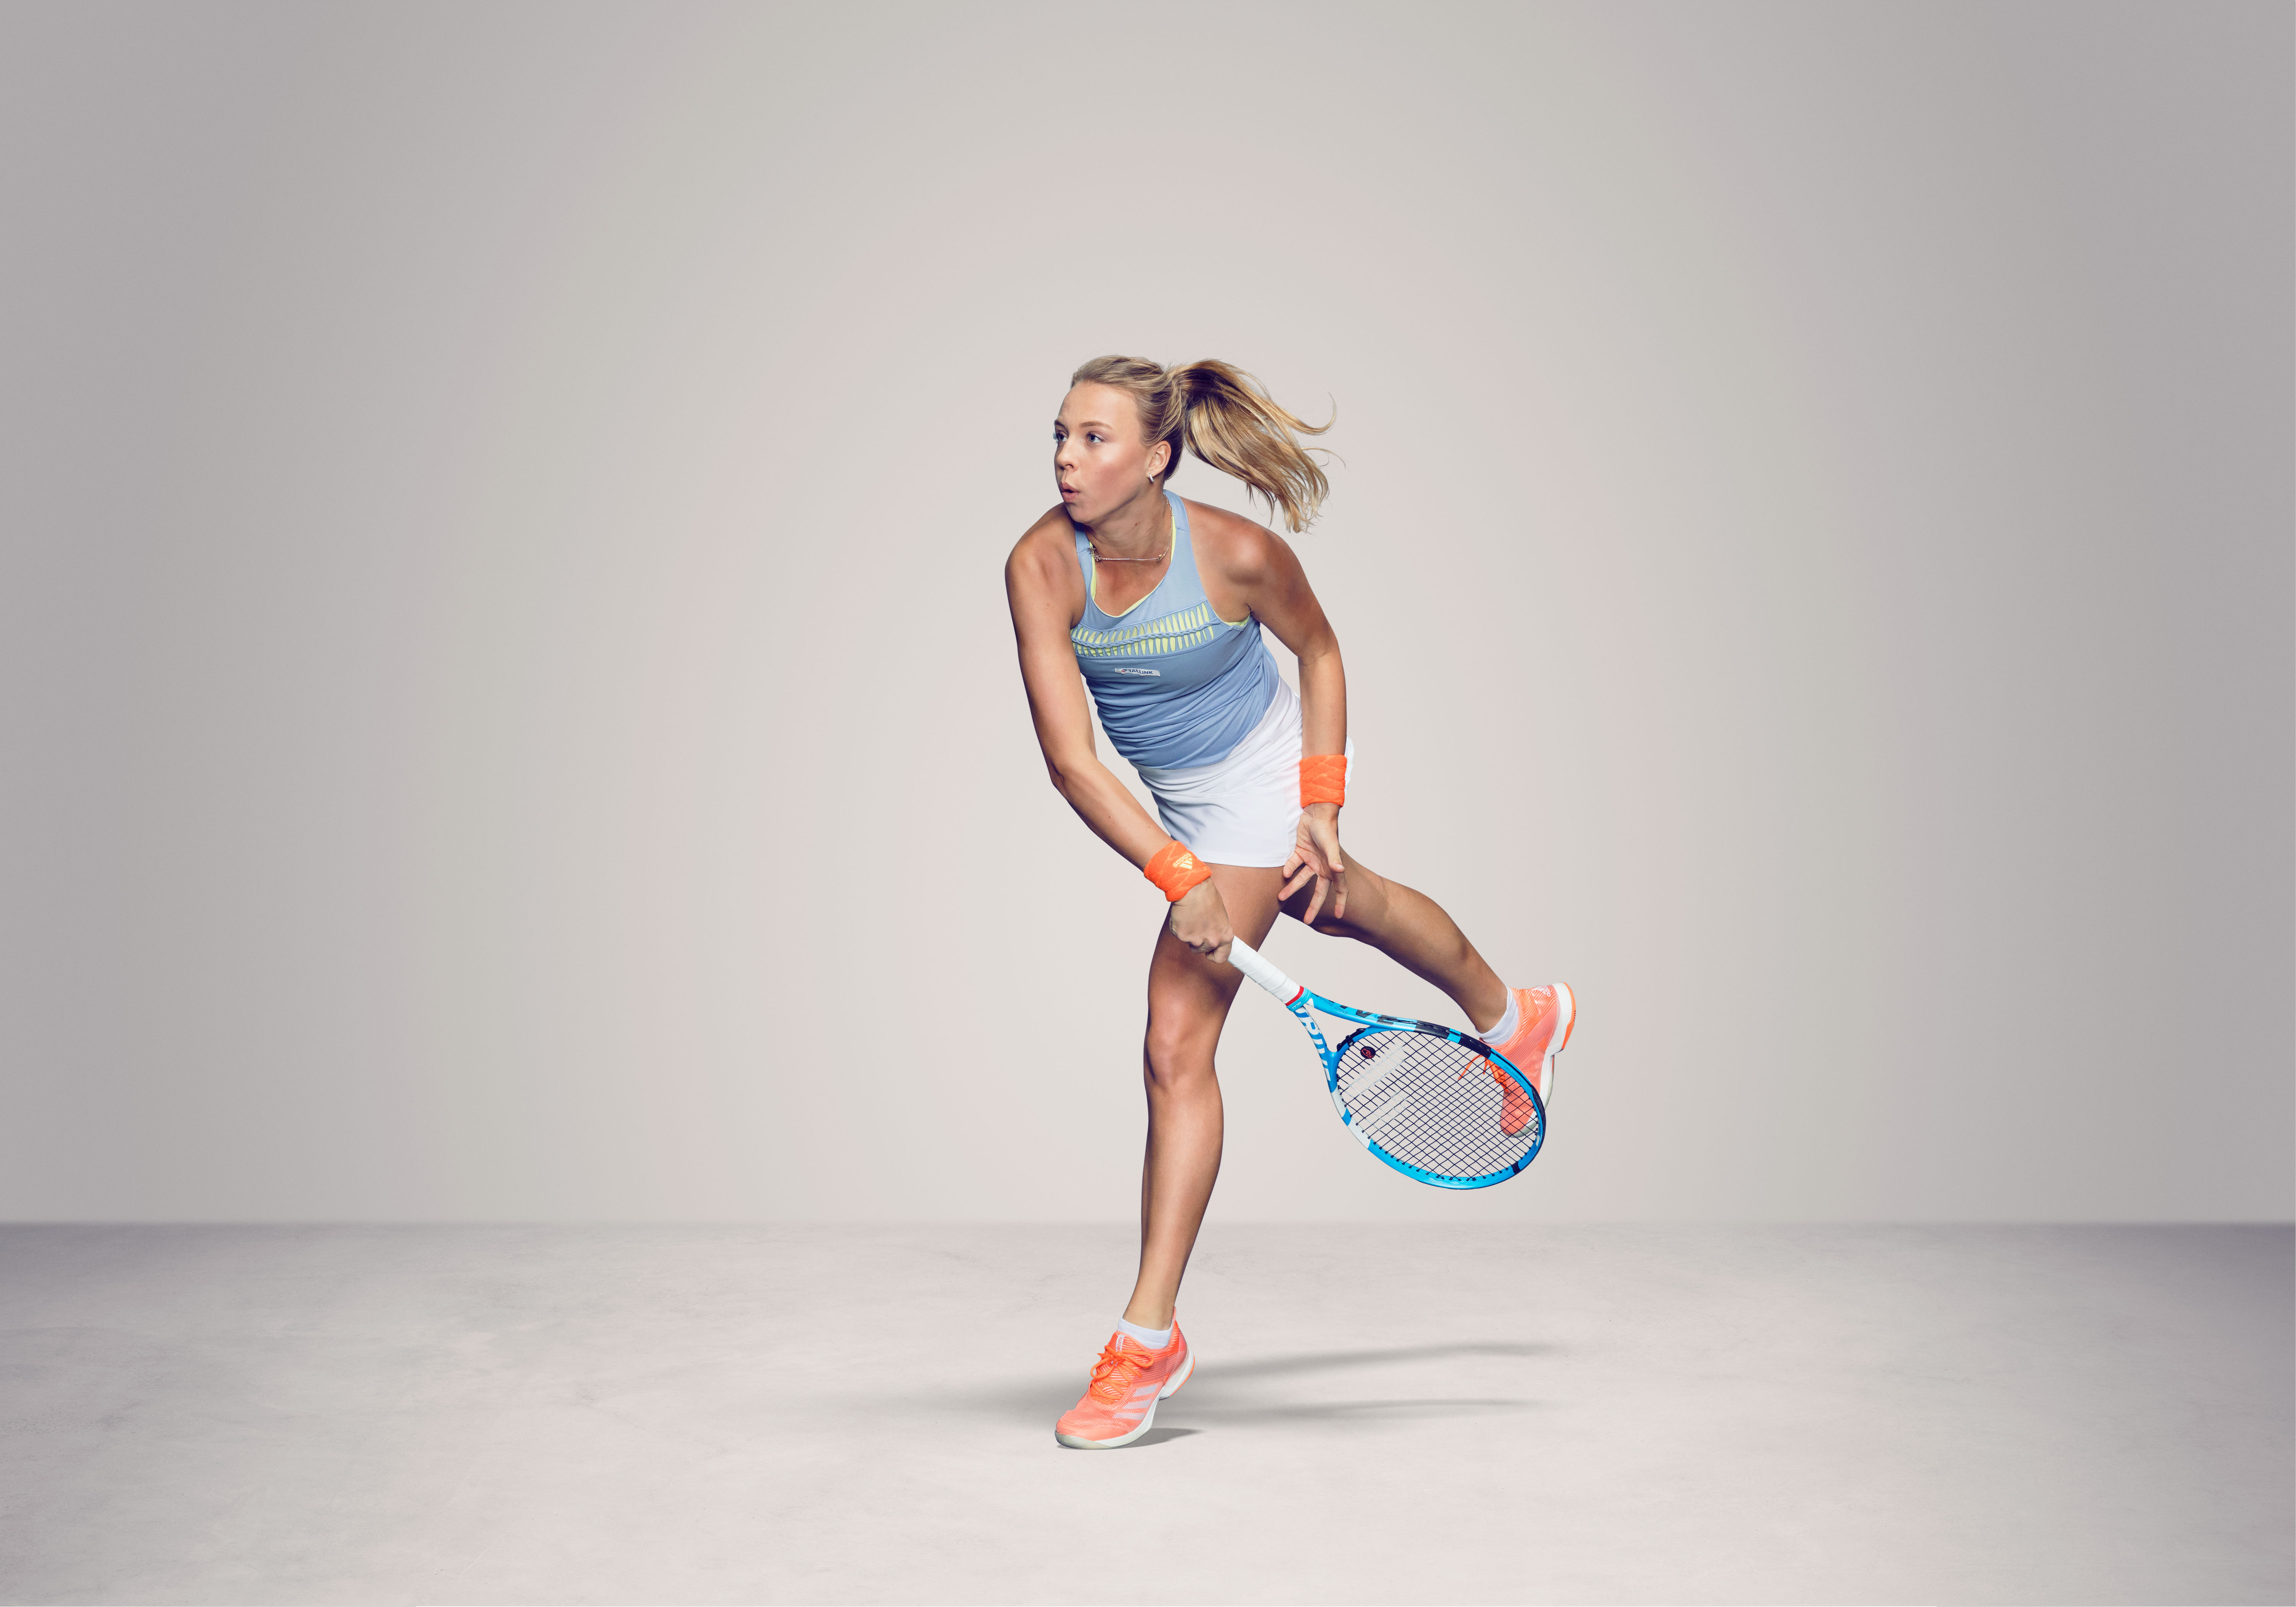 Best Anett Kontaveit mobile Picture